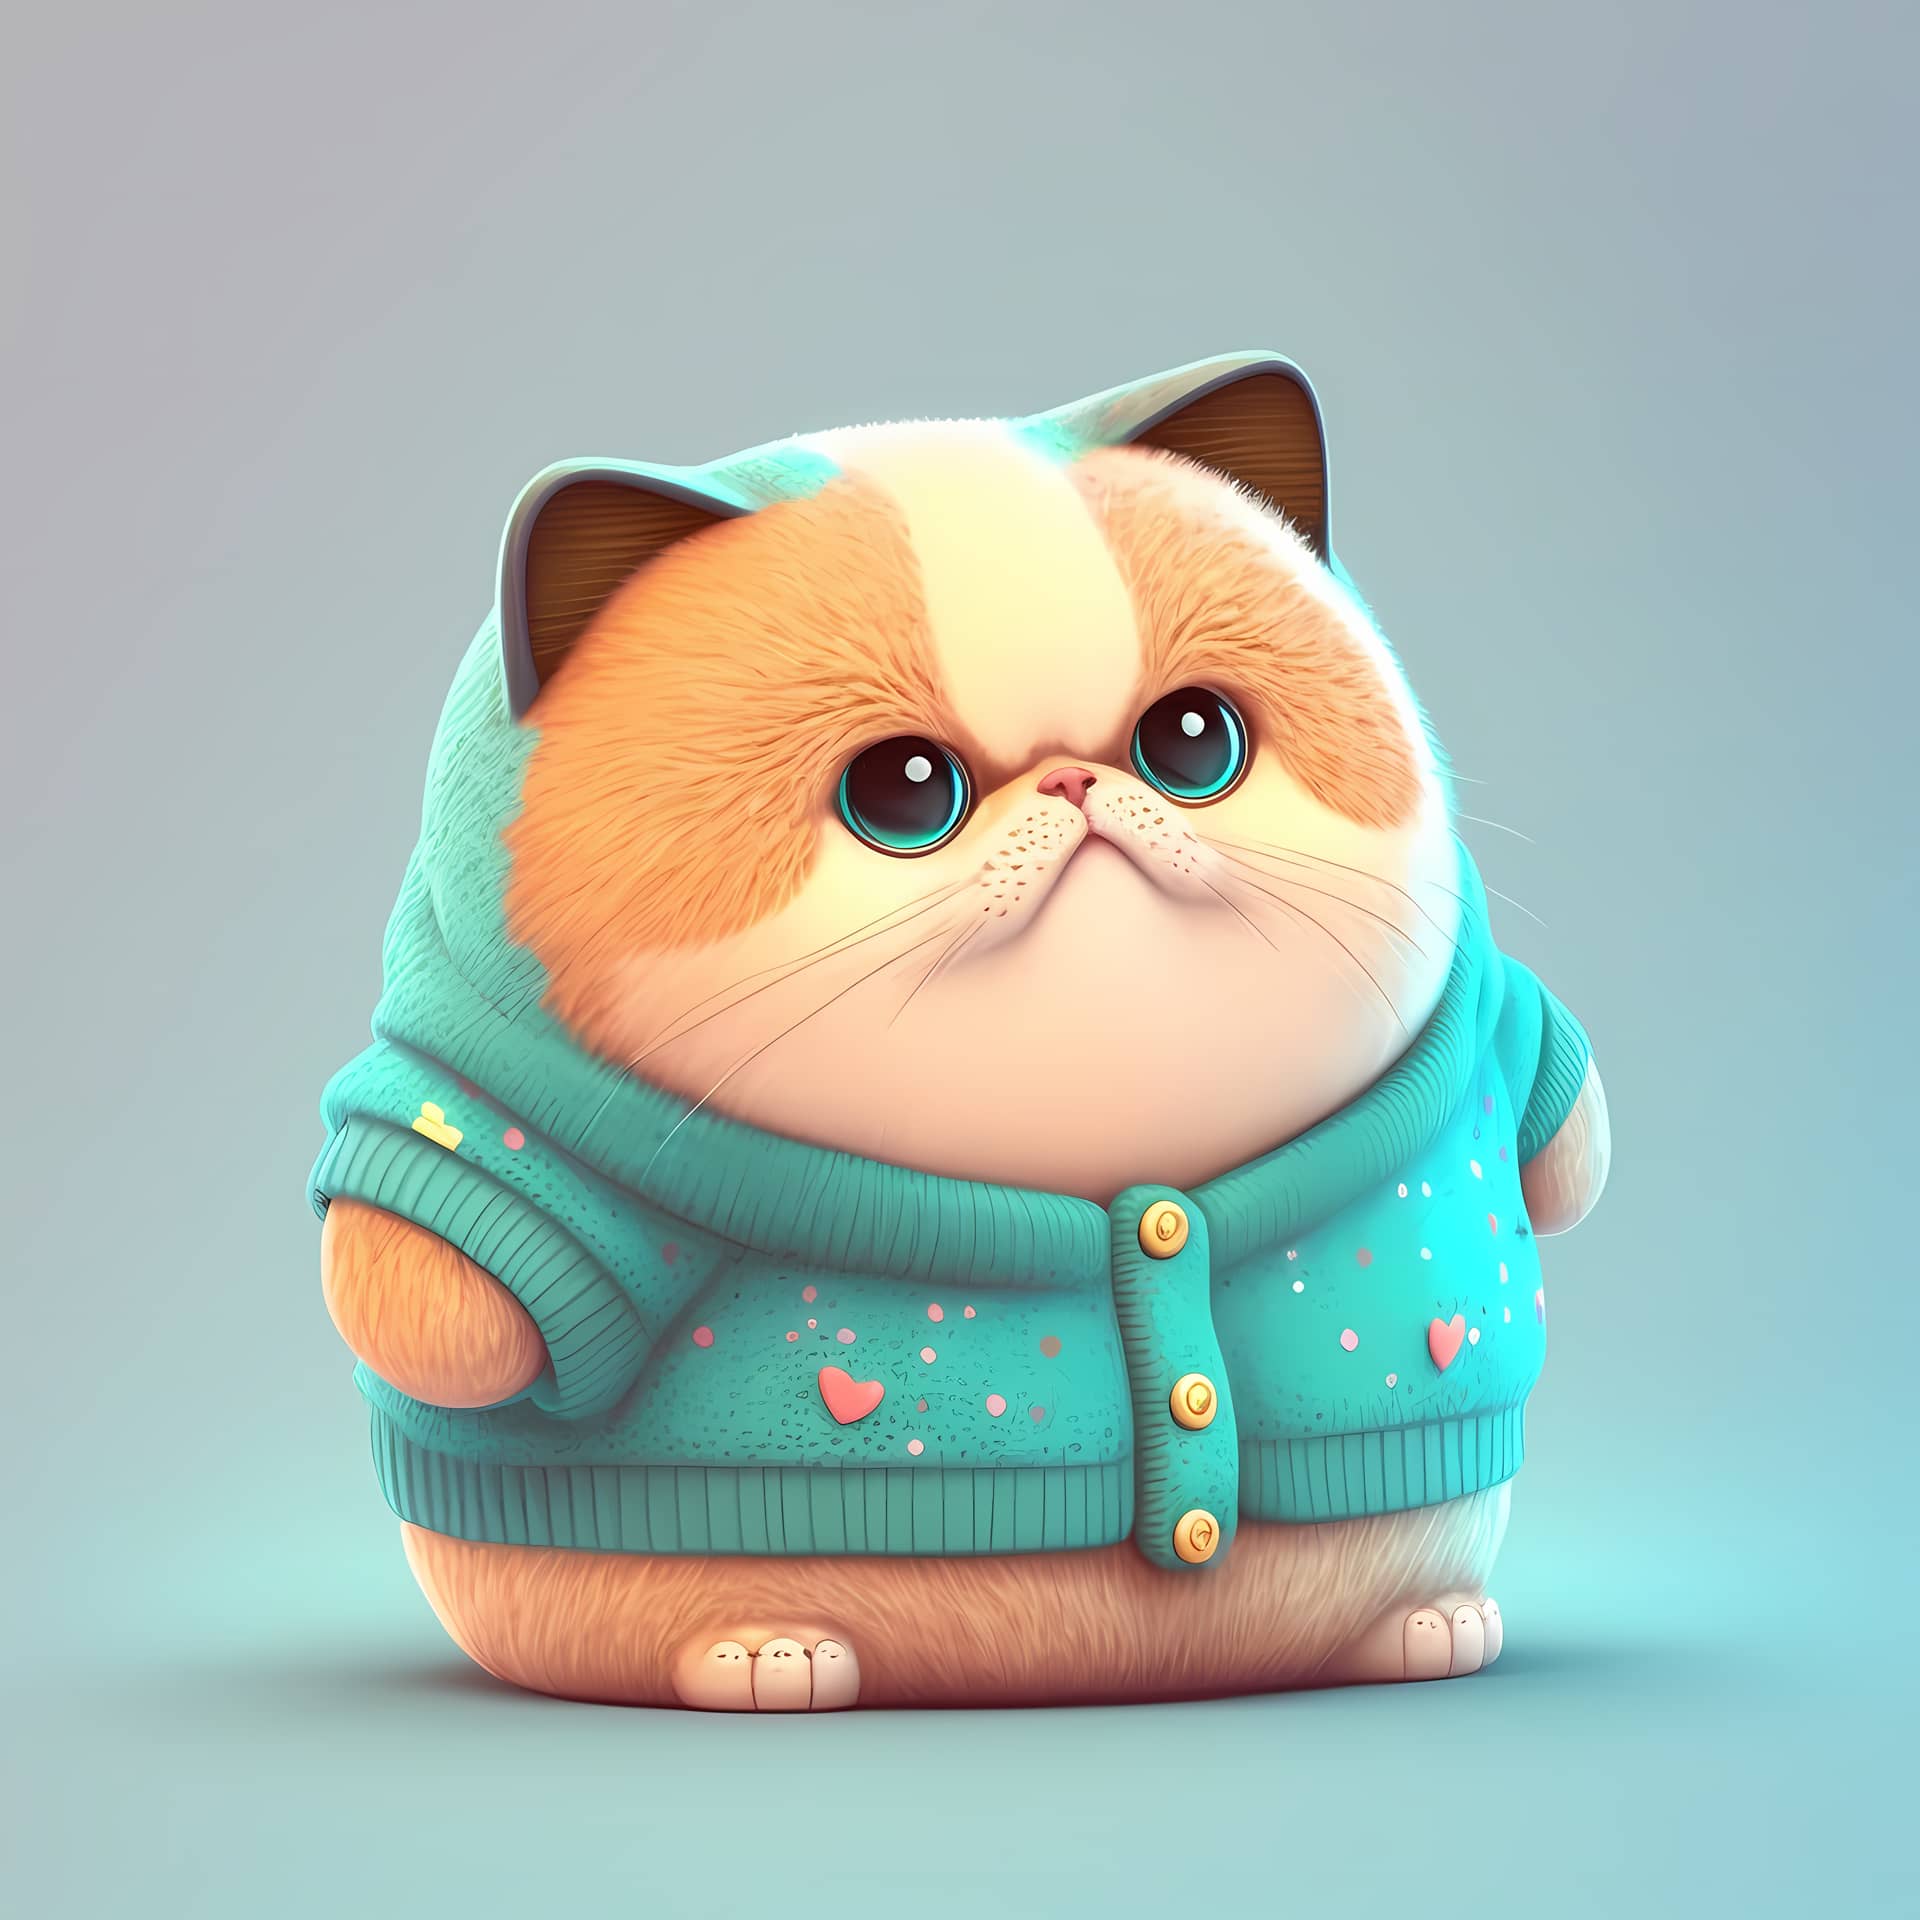 Cute profile photos adorable cat characters wear cute funny colorful clothes